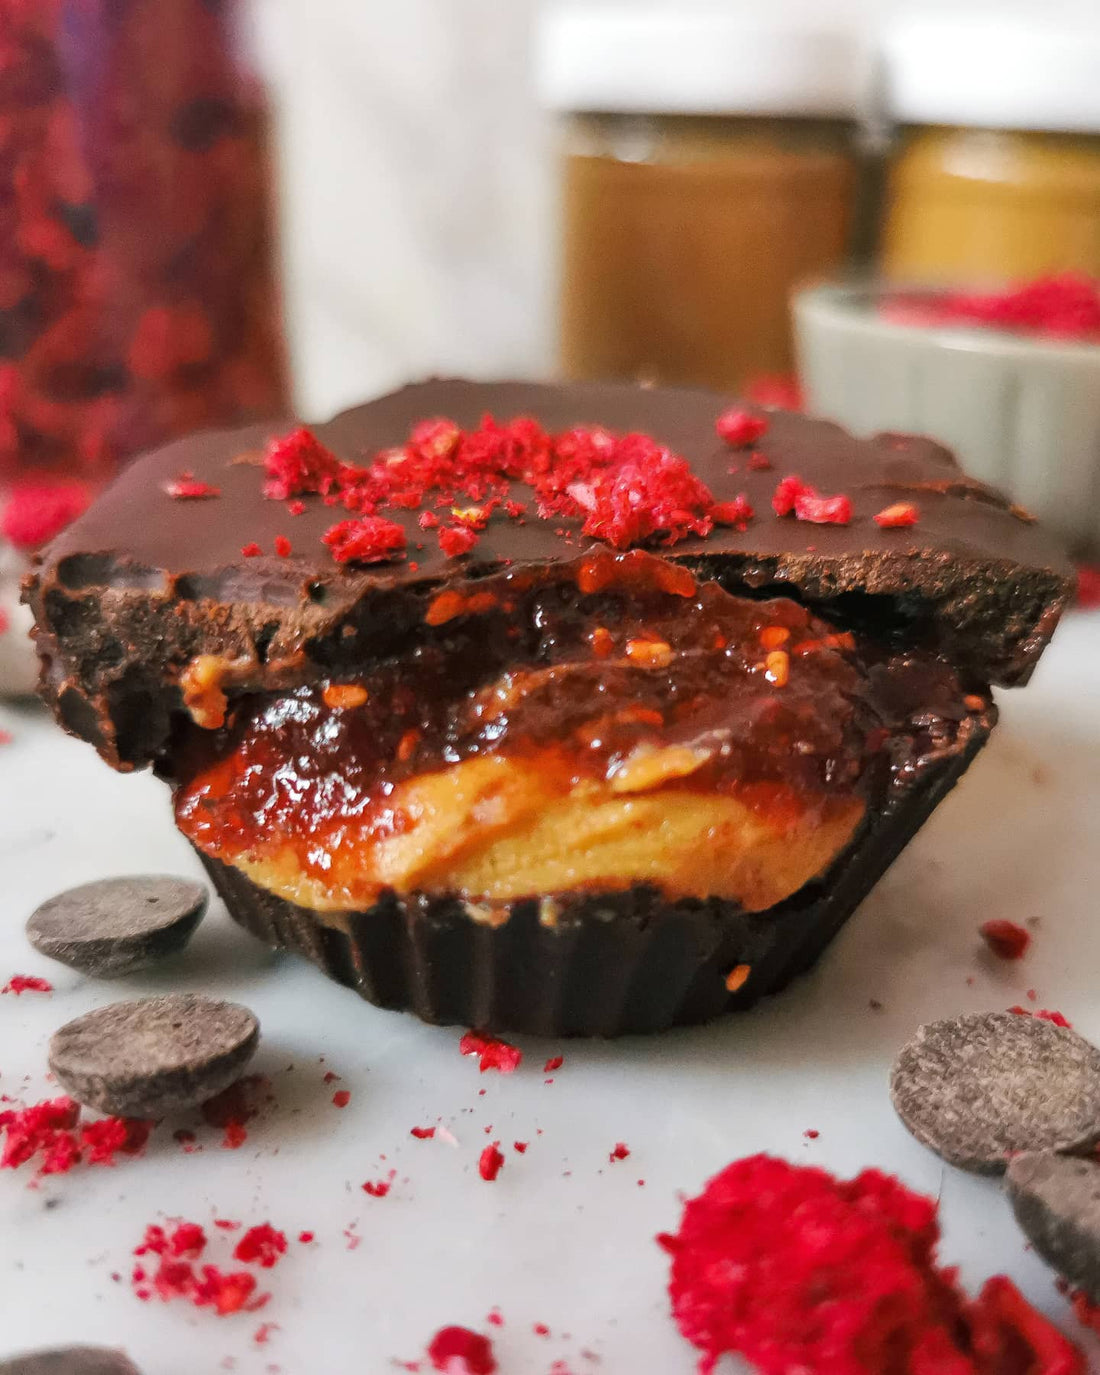 CHOC PEANUT BUTTER JELLY CUP